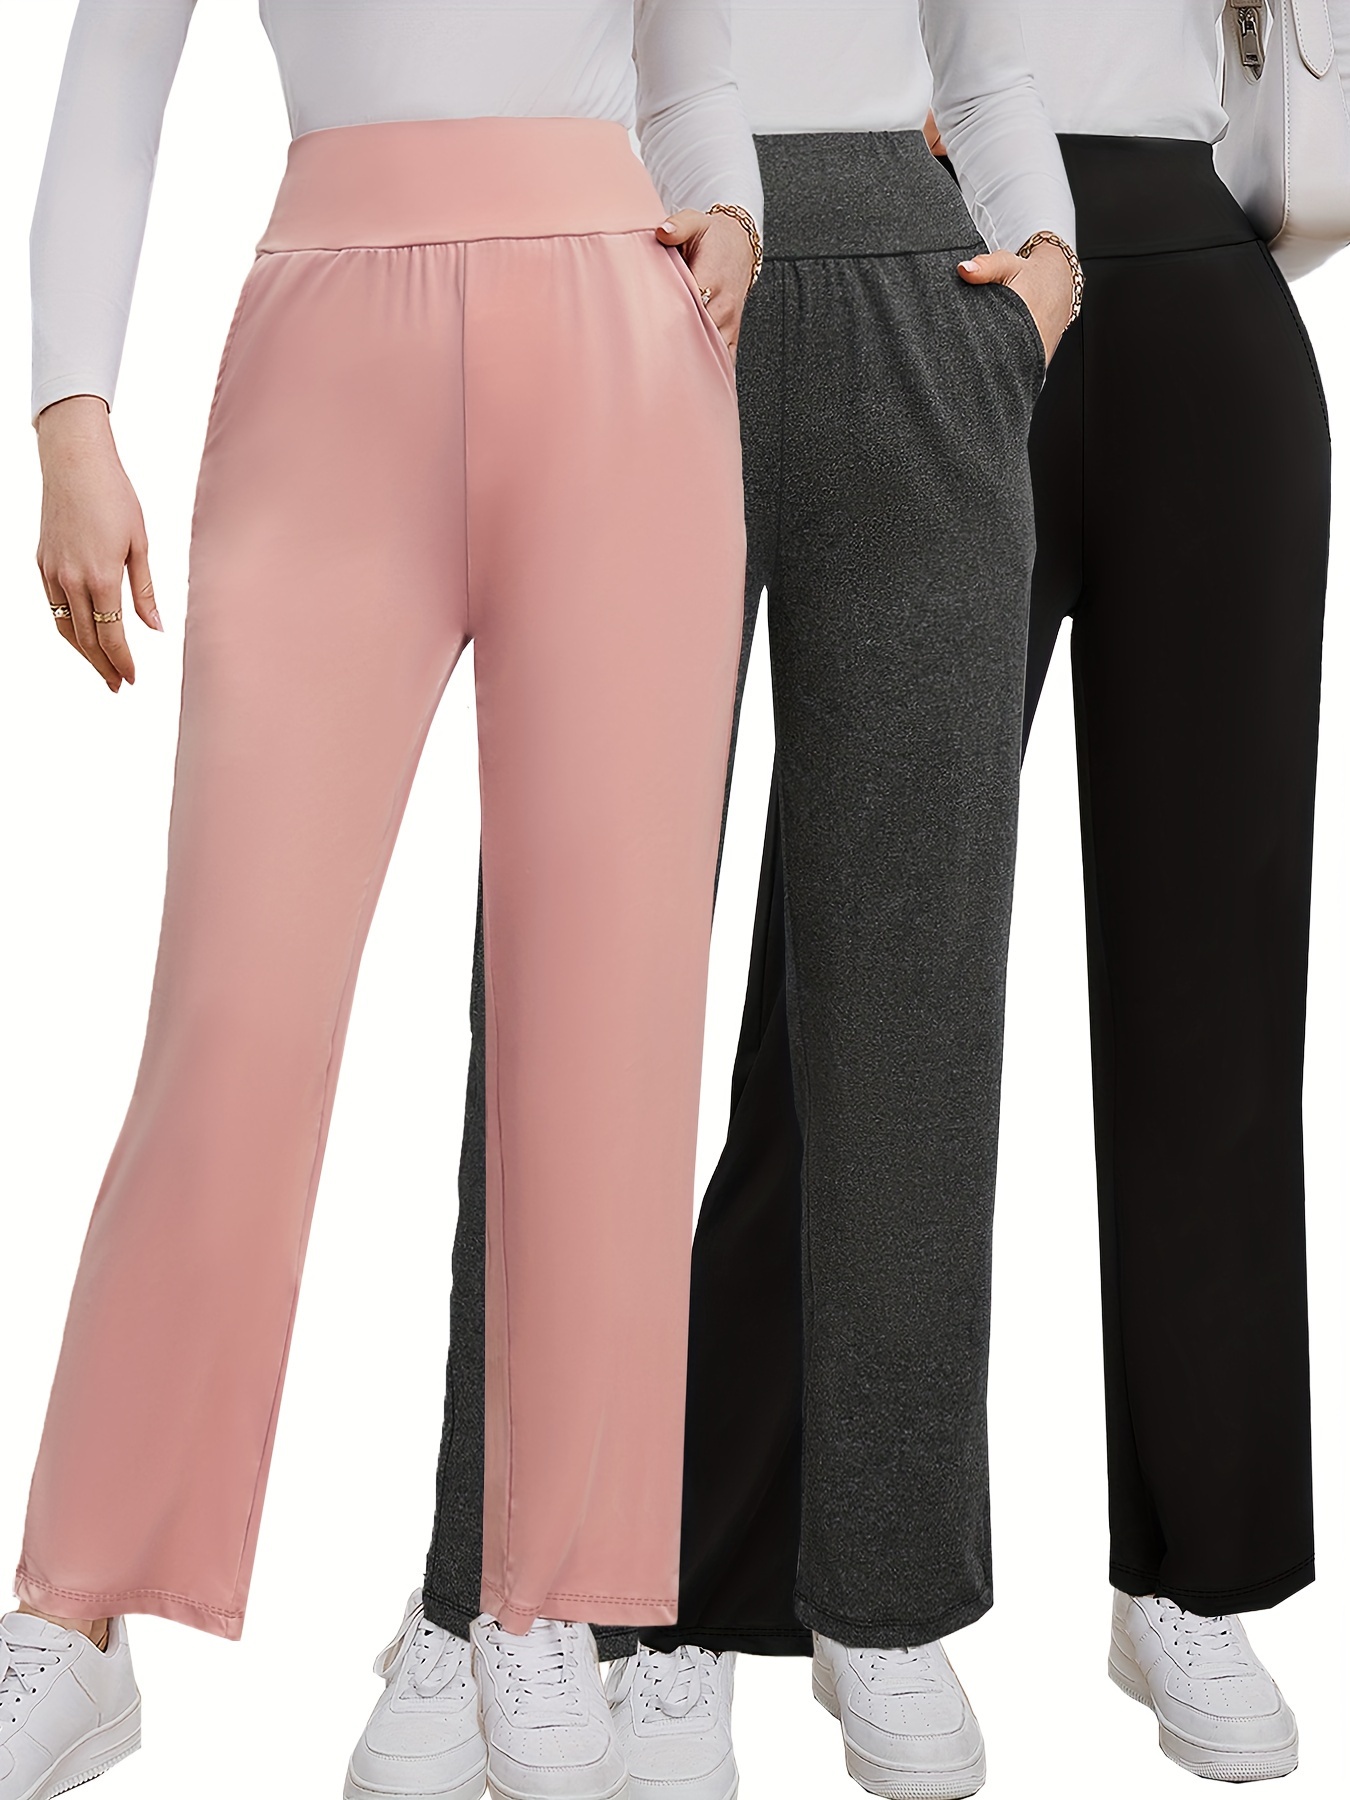 Solid High Waist Pants 3 Pack, Casual Comfy Straight Leg Pants, Women's  Clothing